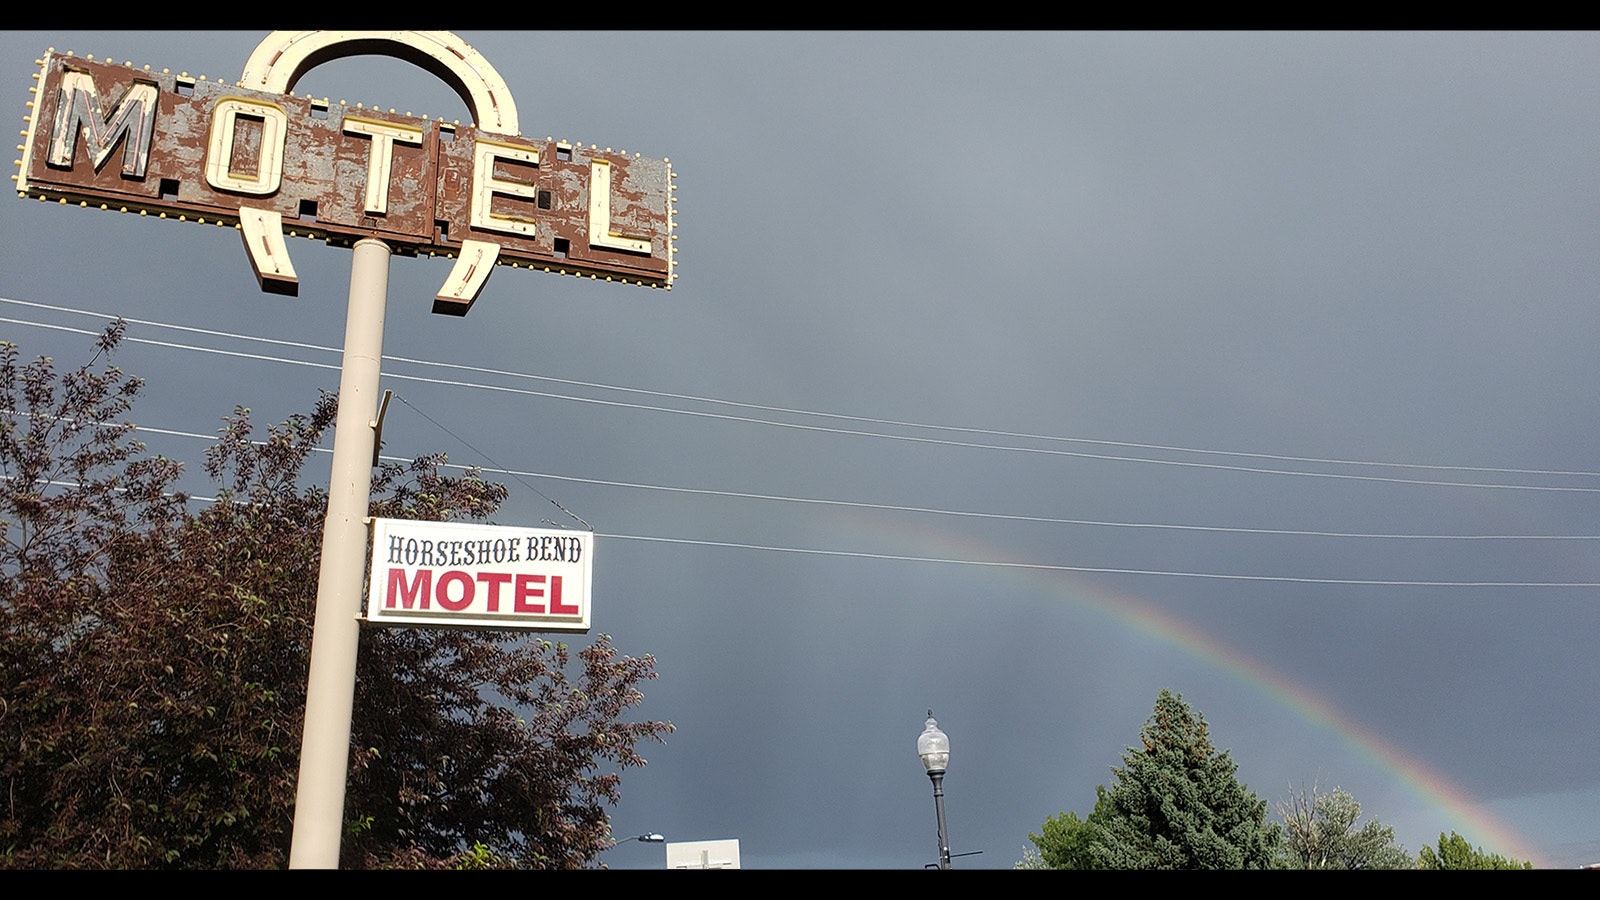 The Horseshoe Bend Motel's sign in Lovell, Wyoming.